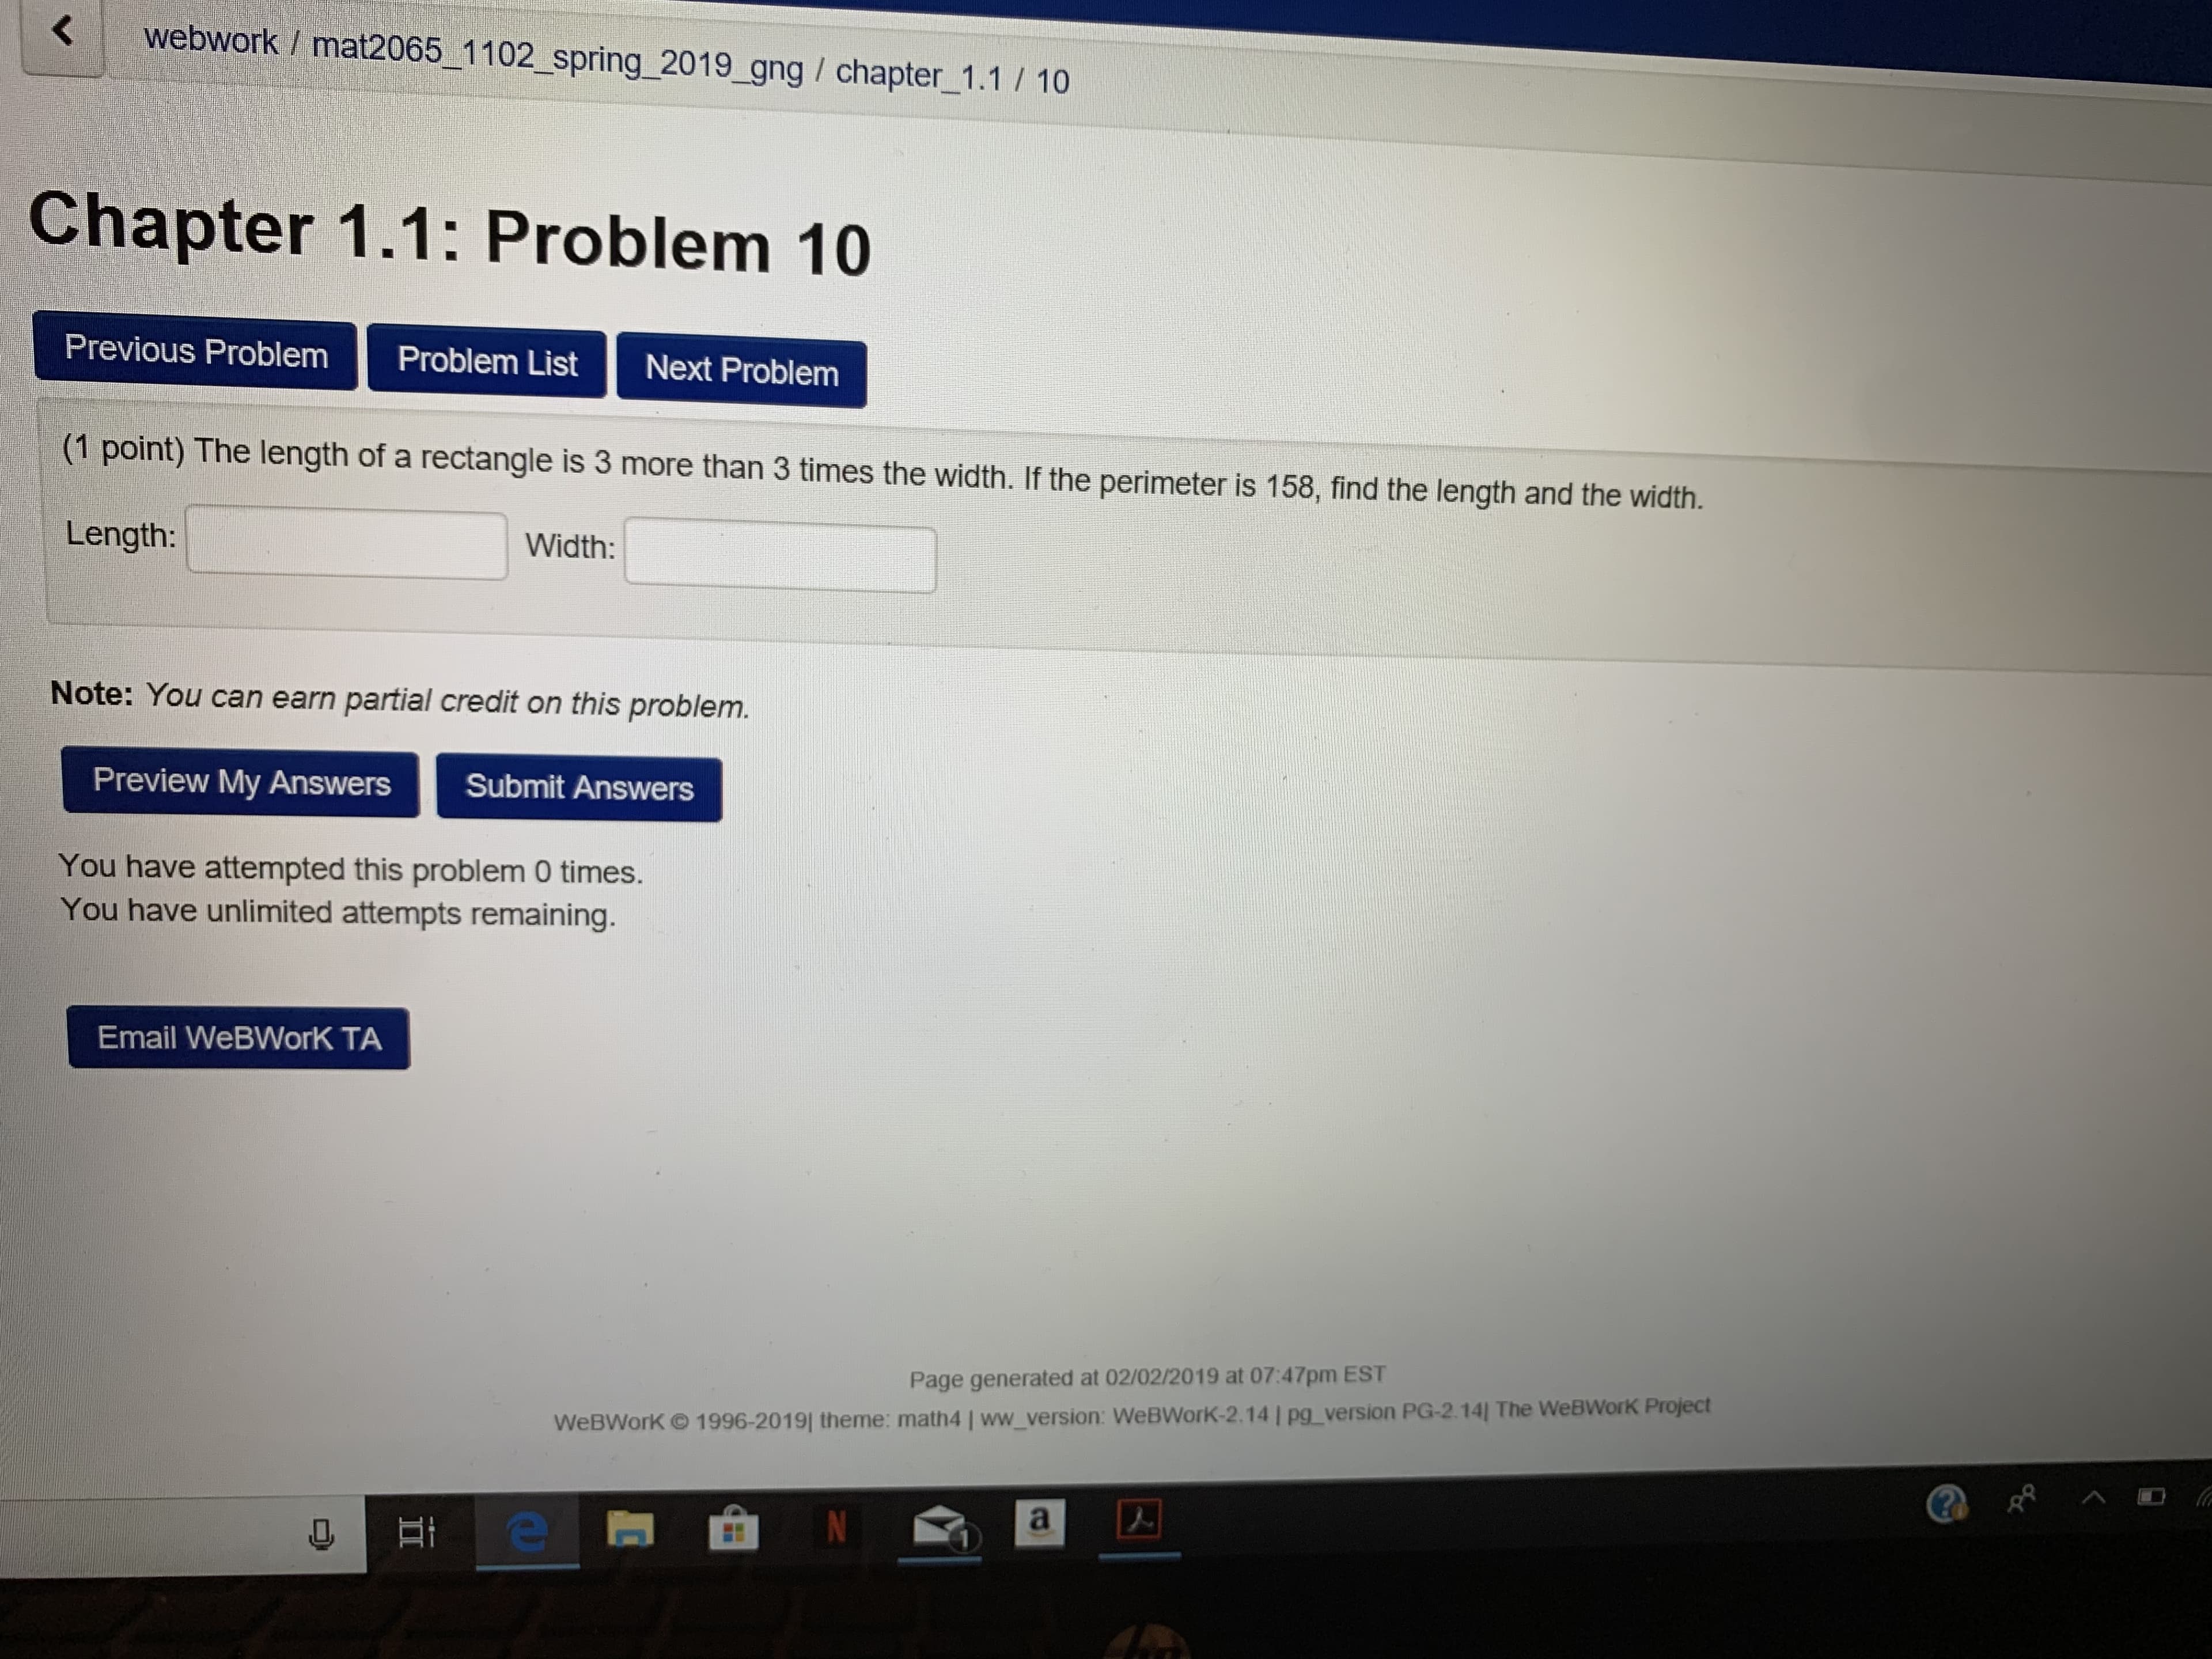 webwork / mat2065_1 102. Spring-2019-ang / chapter-1.1 / 10
Chapter 1.1: Problem 10
Previous Problem Problem List Next Problem
(1 point) The length of a rectangle is 3 more than 3 times the width. If the perimeter is 158, find the length and the width.
Length:
Width:
Note: You can earn partial credit on this problem.
Preview My Answers
Submit Answers
You have attempted this problem 0 times.
You have unlimited attempts remaining.
Email WeBWorK TA
Page generated at 02/0272019 at 07:47pm EST
Work Project
WeBWorK © 1996-2019|廿 eme : math41 ww version WeBWorK-2. 14 l pg-version PG-2.14] The WeB
